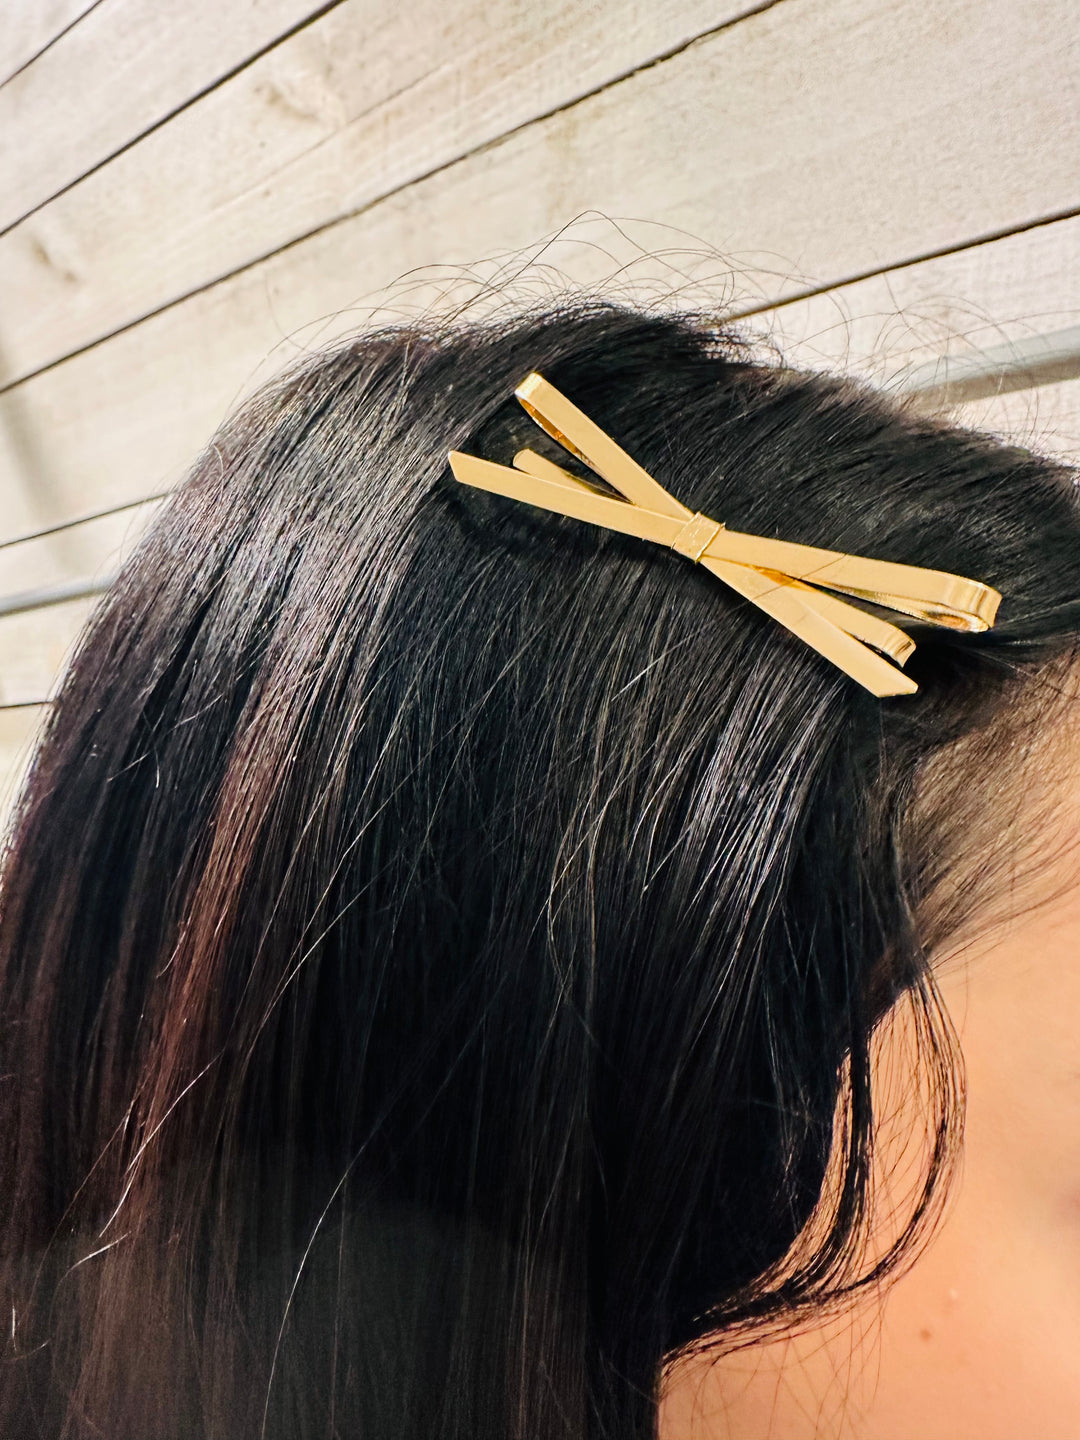 2 Piece Minimalist Gold Bow Bobby Pin Hair Clip Set, Miscellaneous, Adeline, Adeline, dallas boutique, dallas texas, texas boutique, women's boutique dallas, adeline boutique, dallas boutique, trendy boutique, affordable boutique